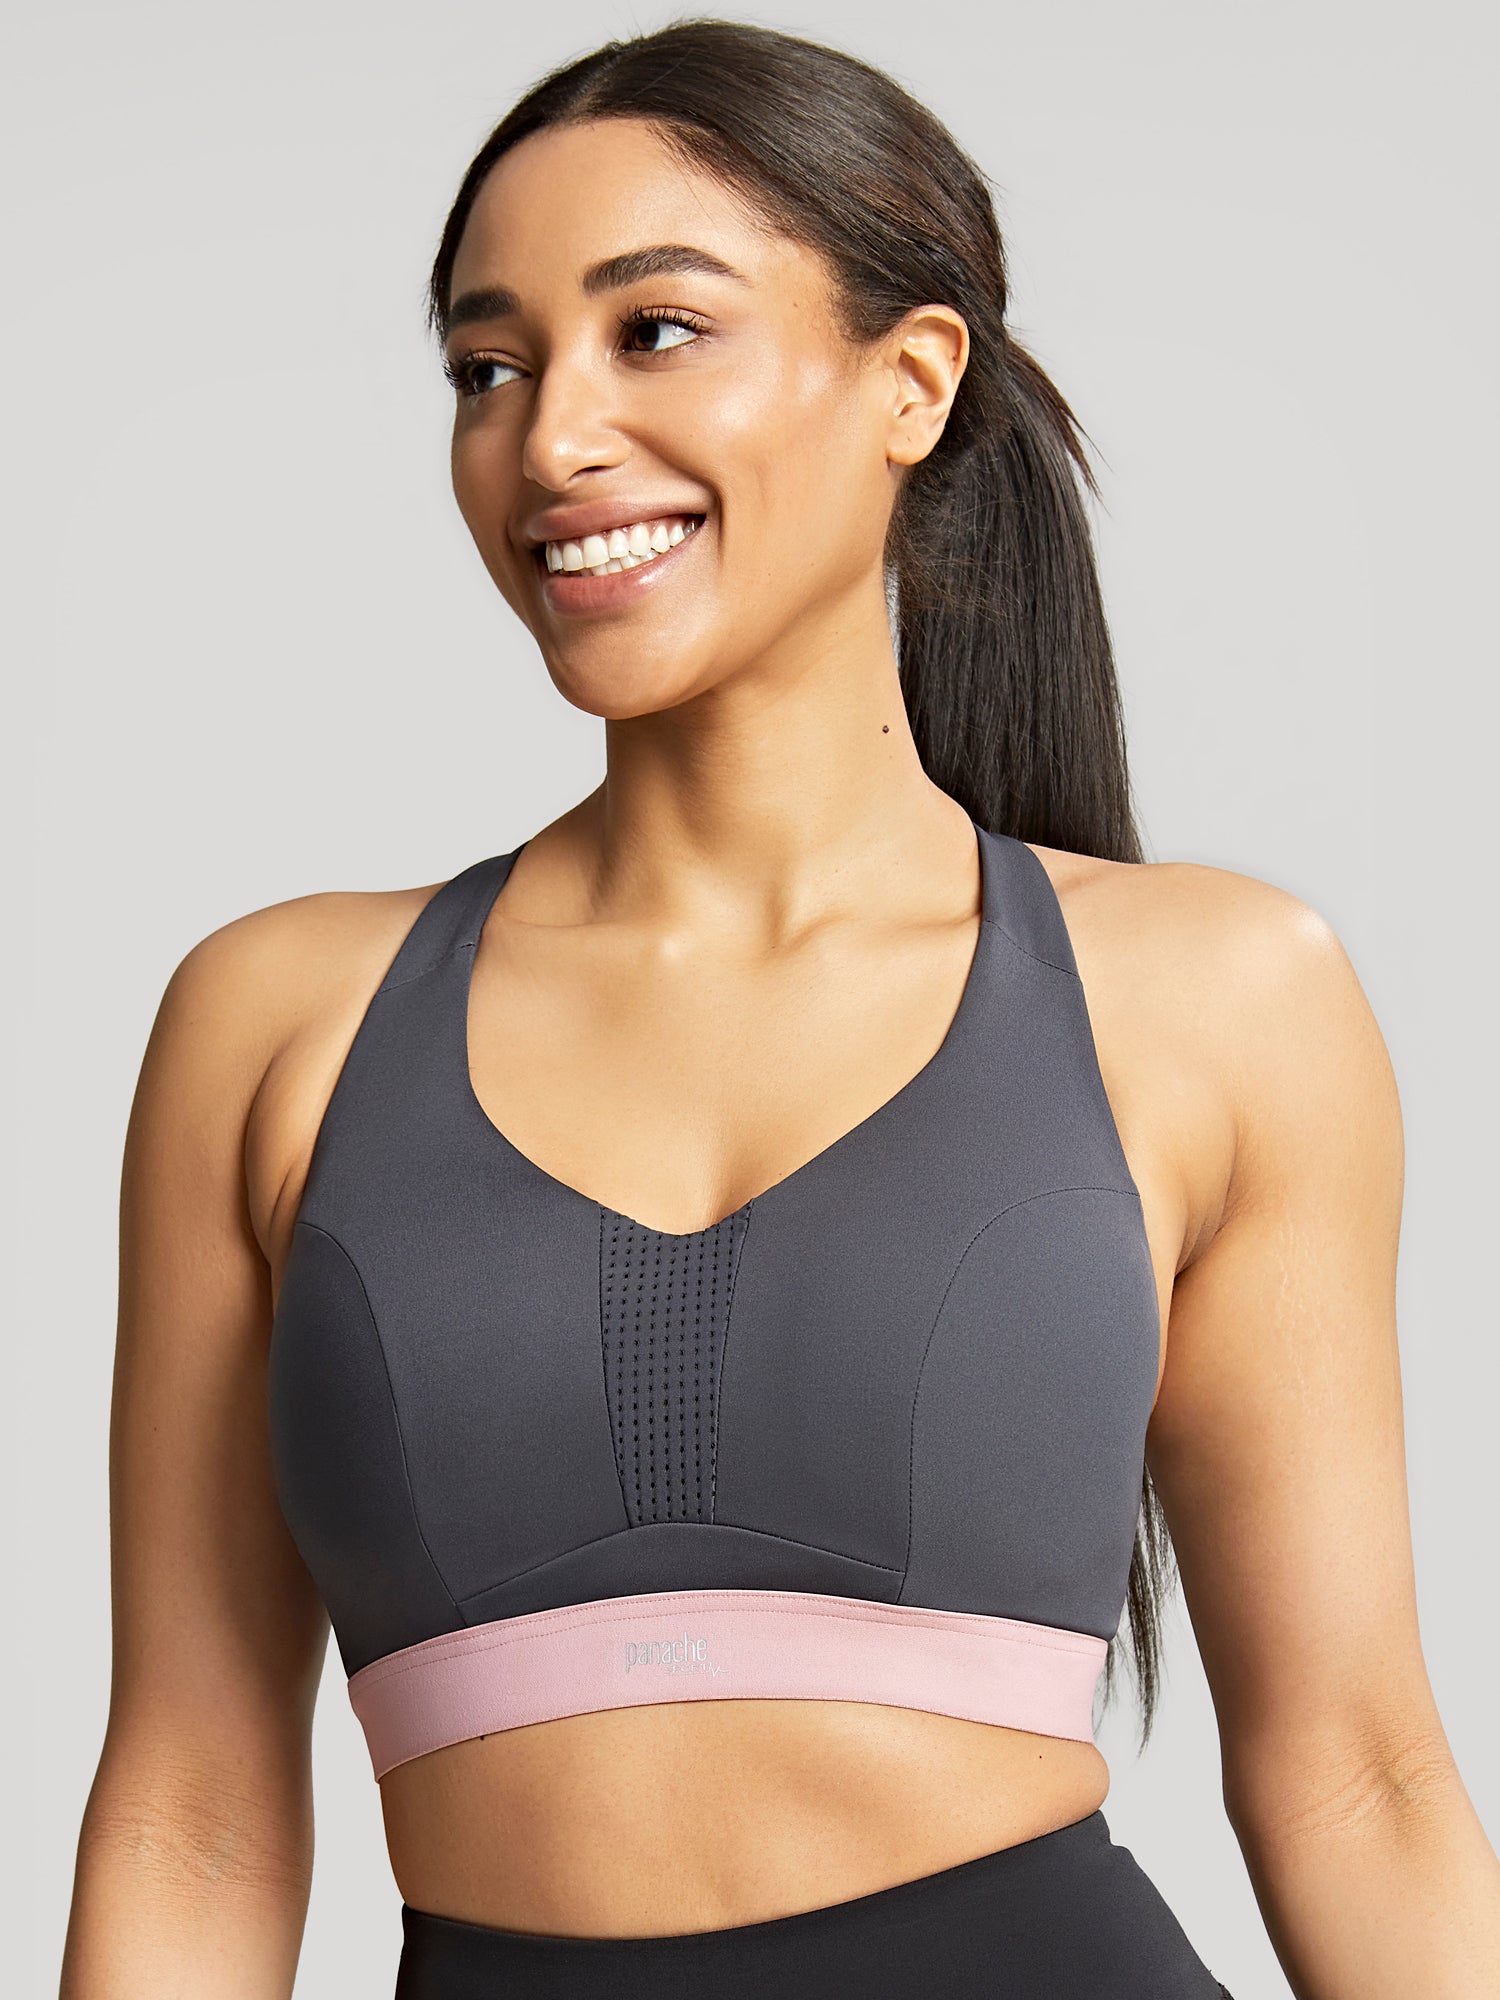 Panache Ultra Perform Non Padded Sports Bra - Fashion Color – Bra Fittings  by Court